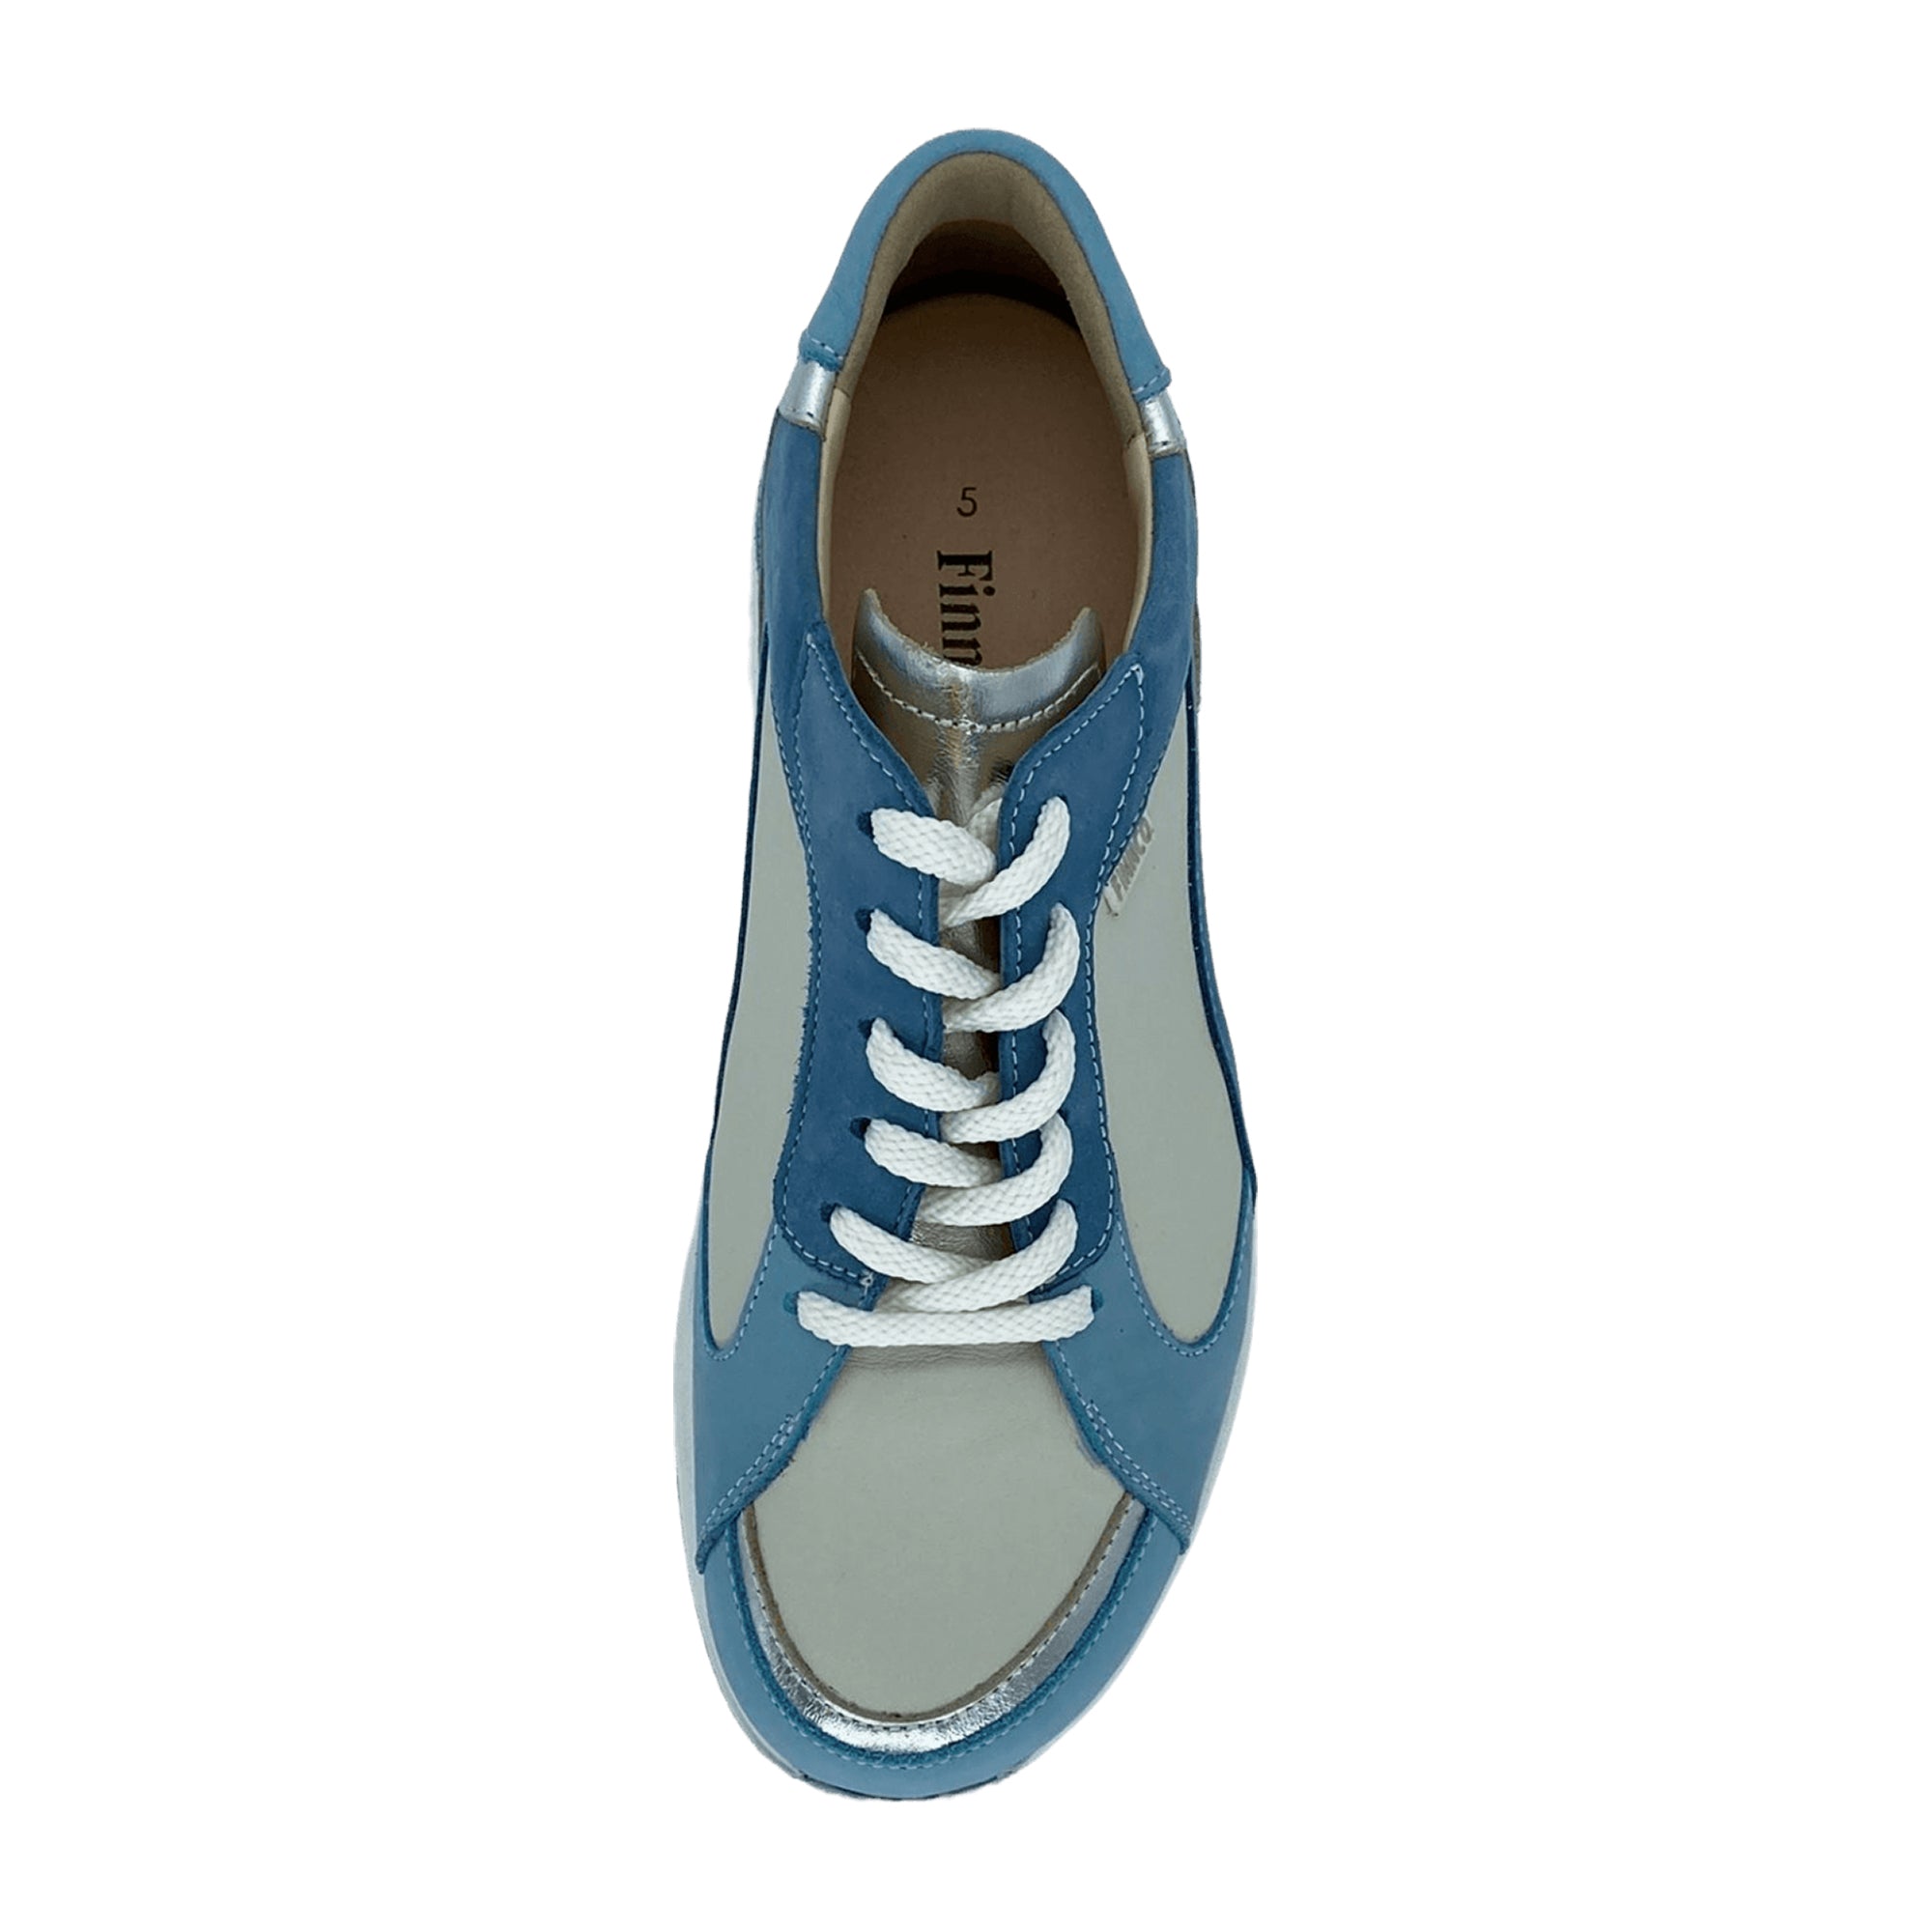 Finn Comfort Piccadilly Women's Comfortable Blue Shoes - Stylish & Durable